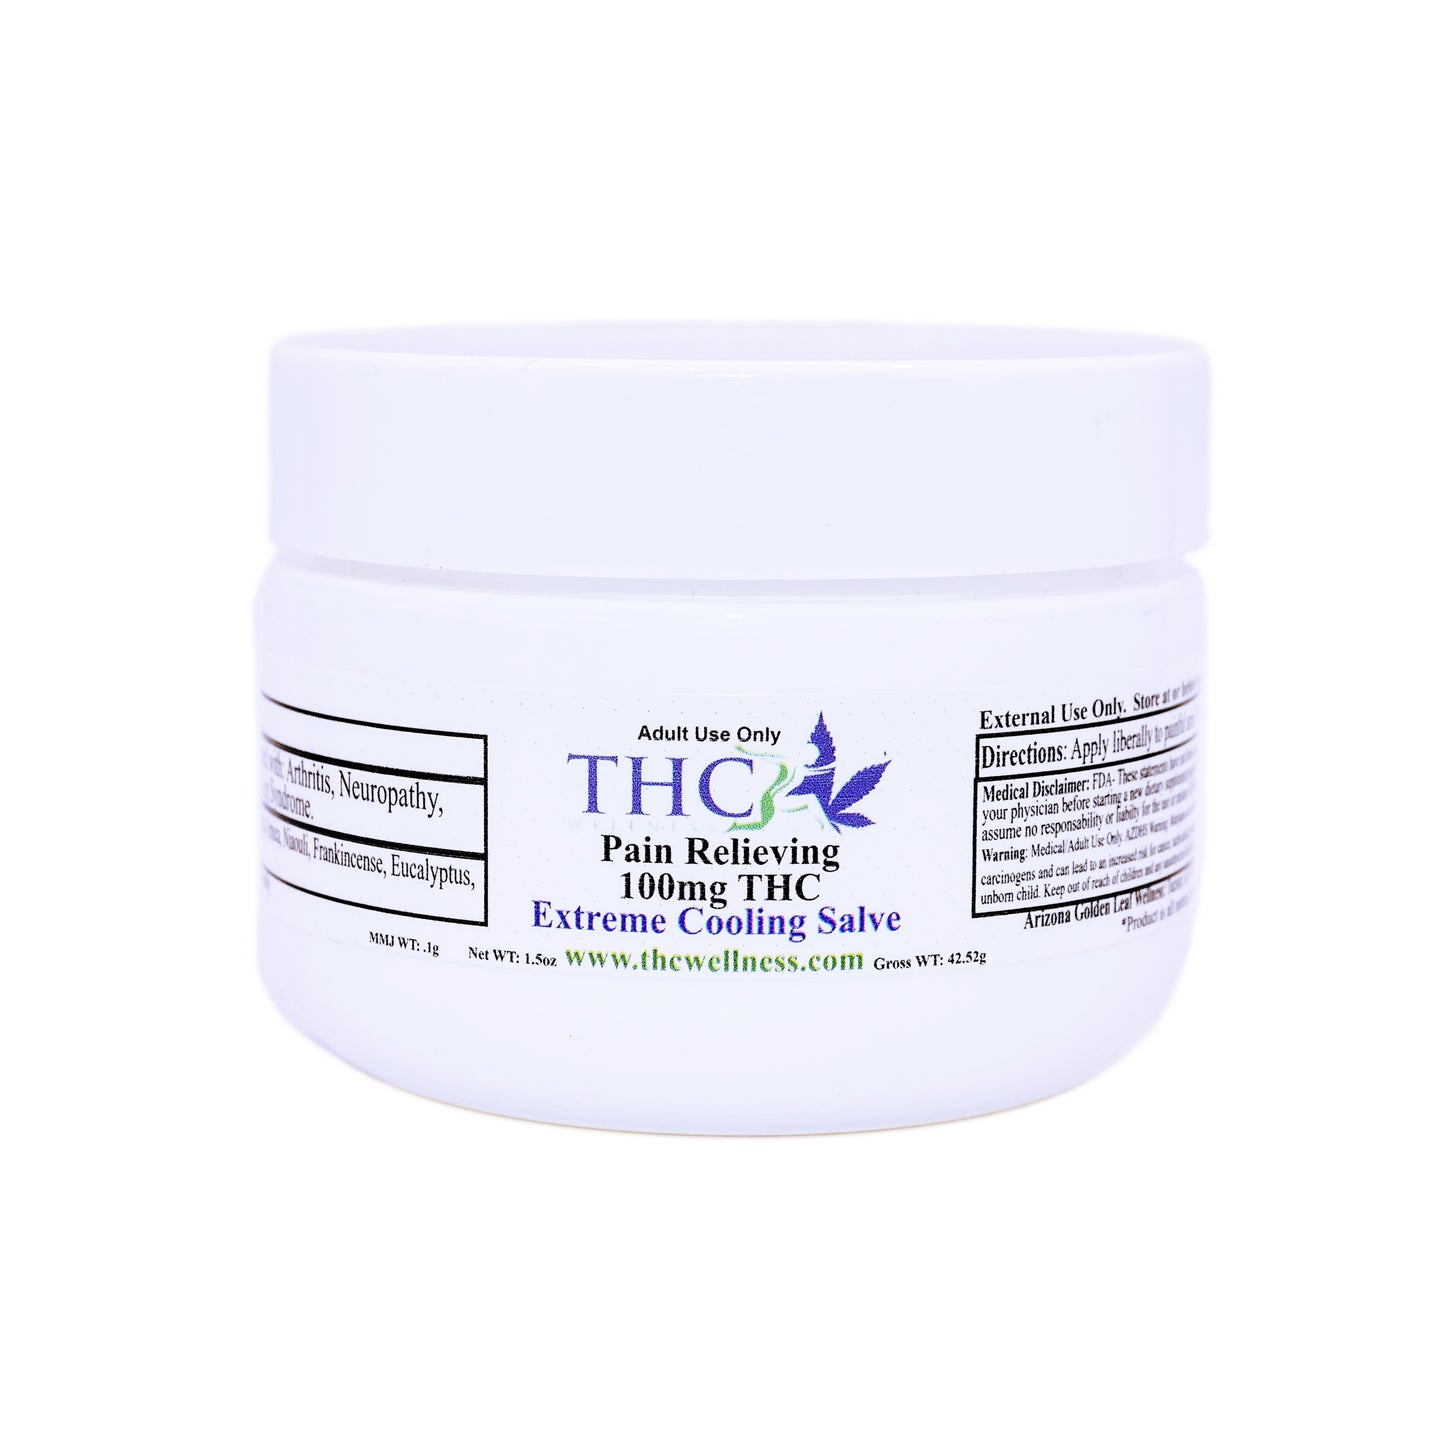 1.5oz 100mg THC Extreme Cooling Salve